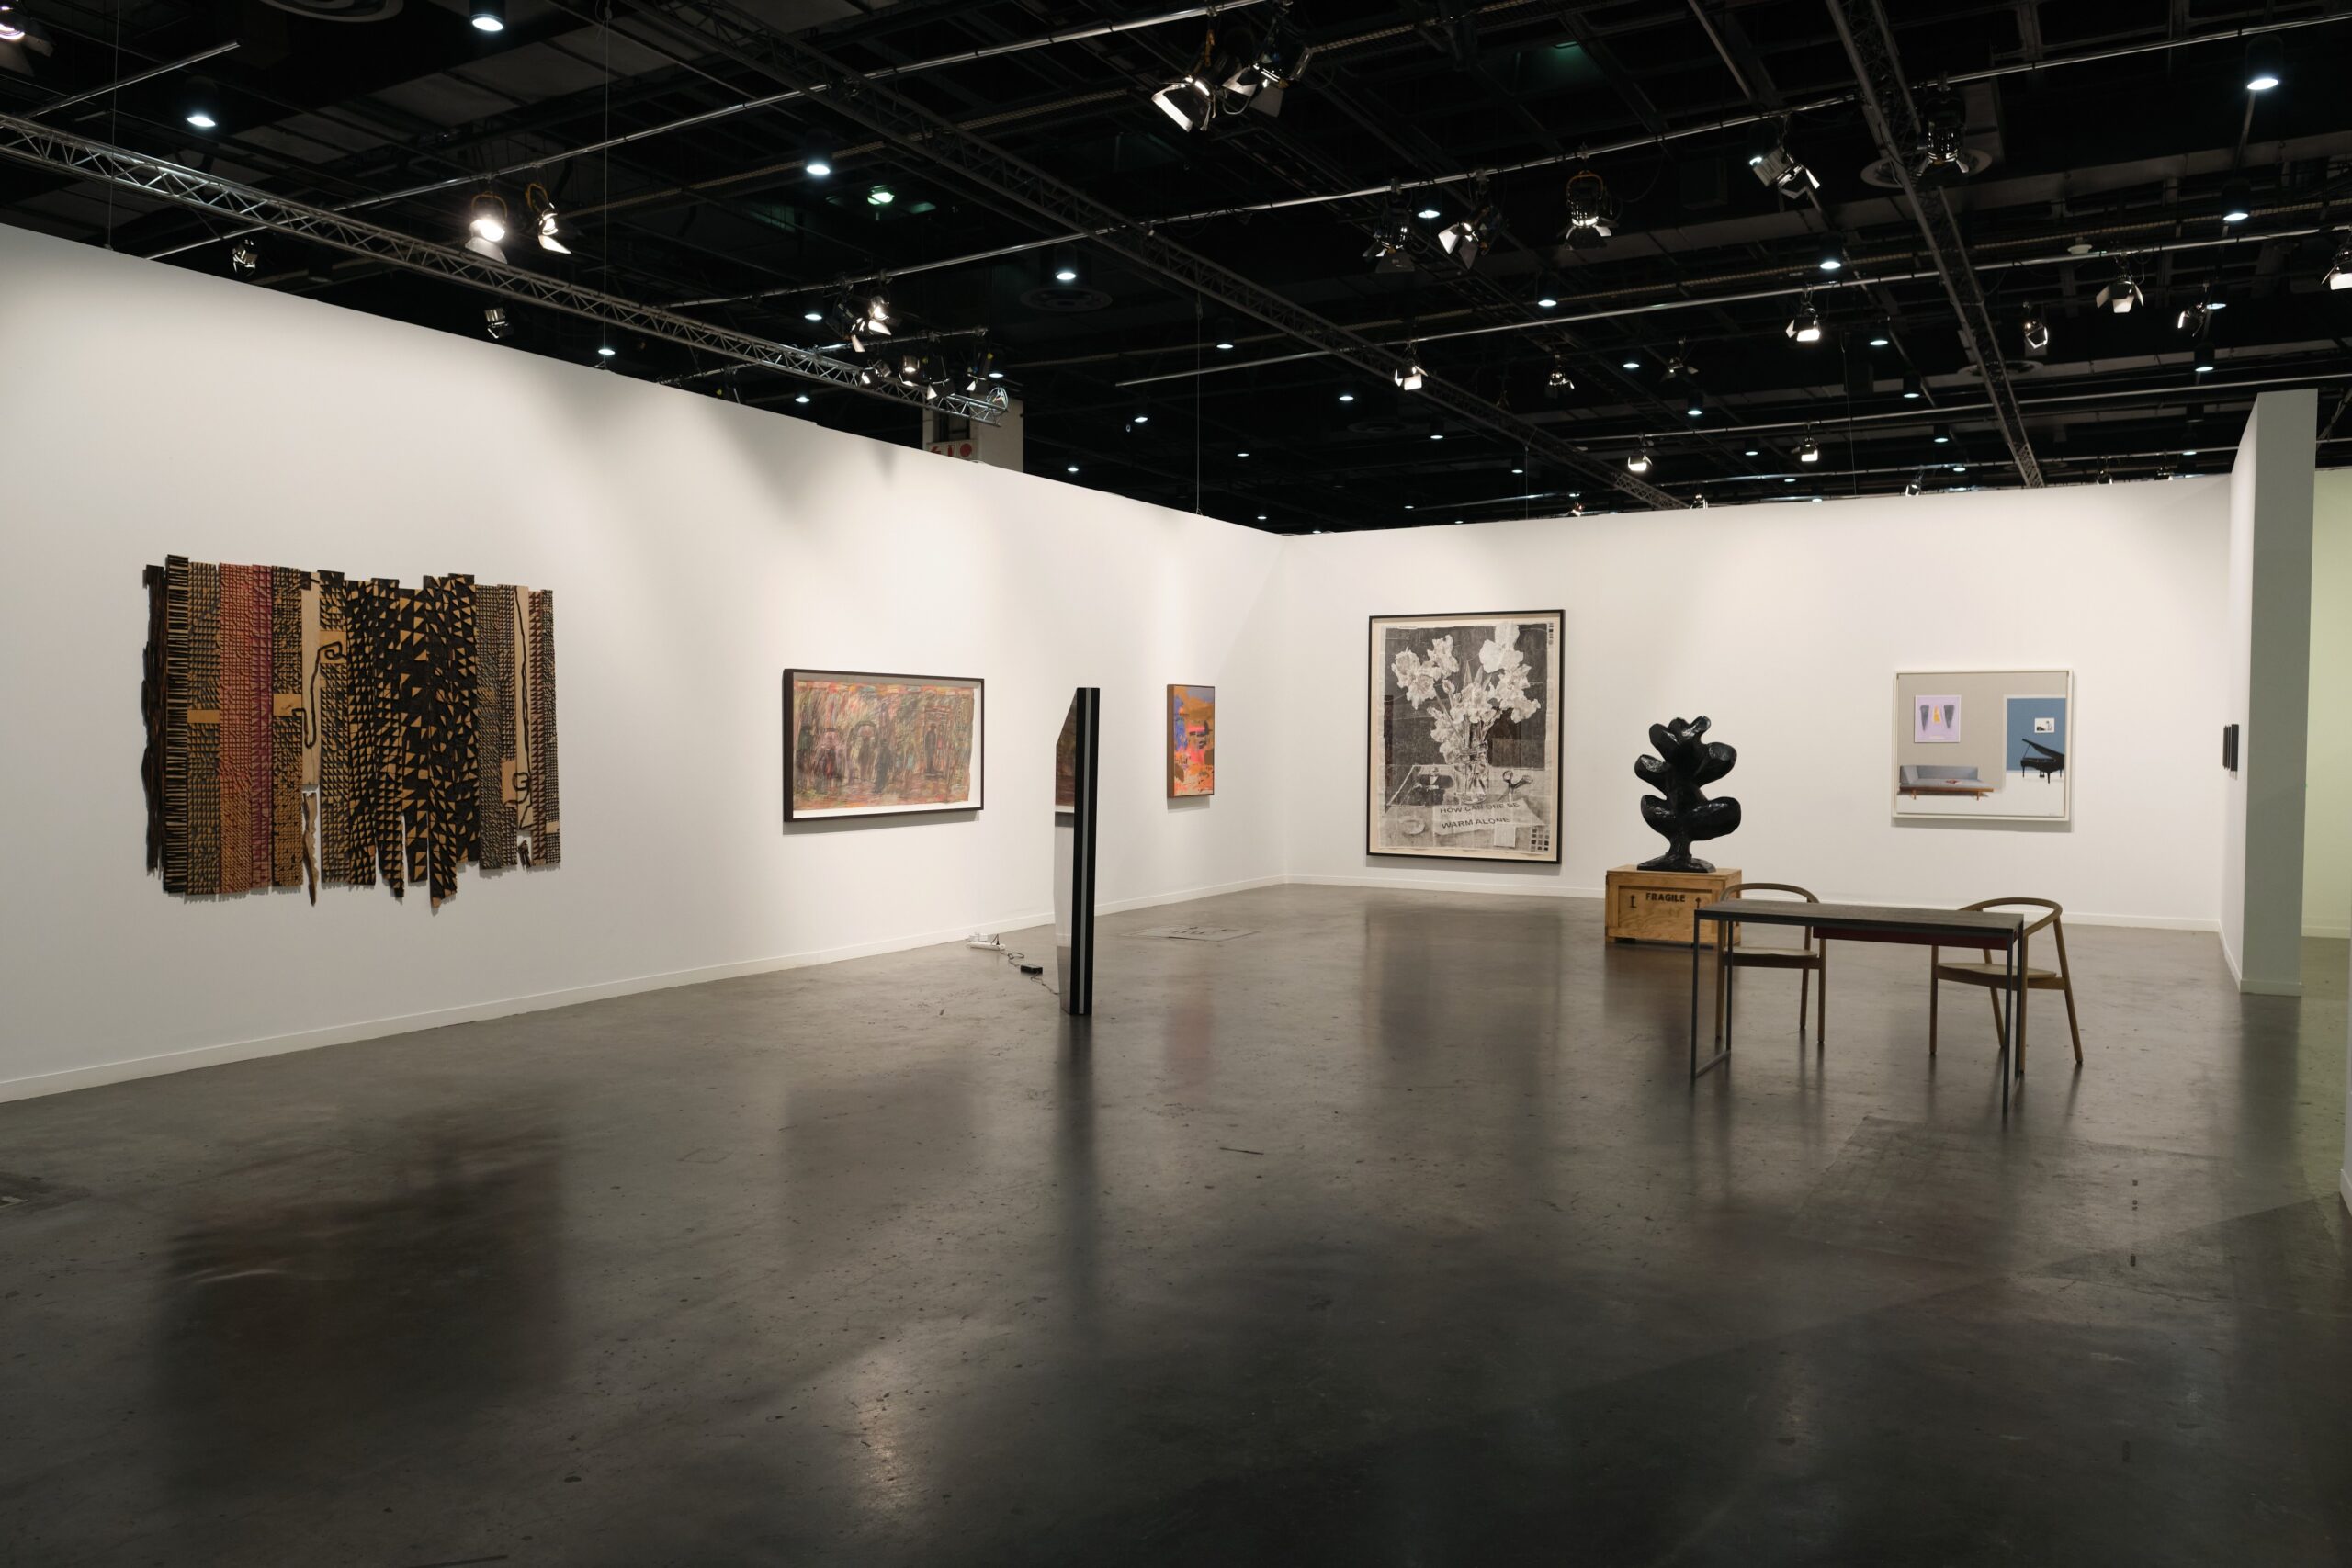 Installation view of Goodman Gallery’s gallery HUB booth at the 2022 edition of FNb Art Joburg. (Image courtesy of FNB Art Joburg)